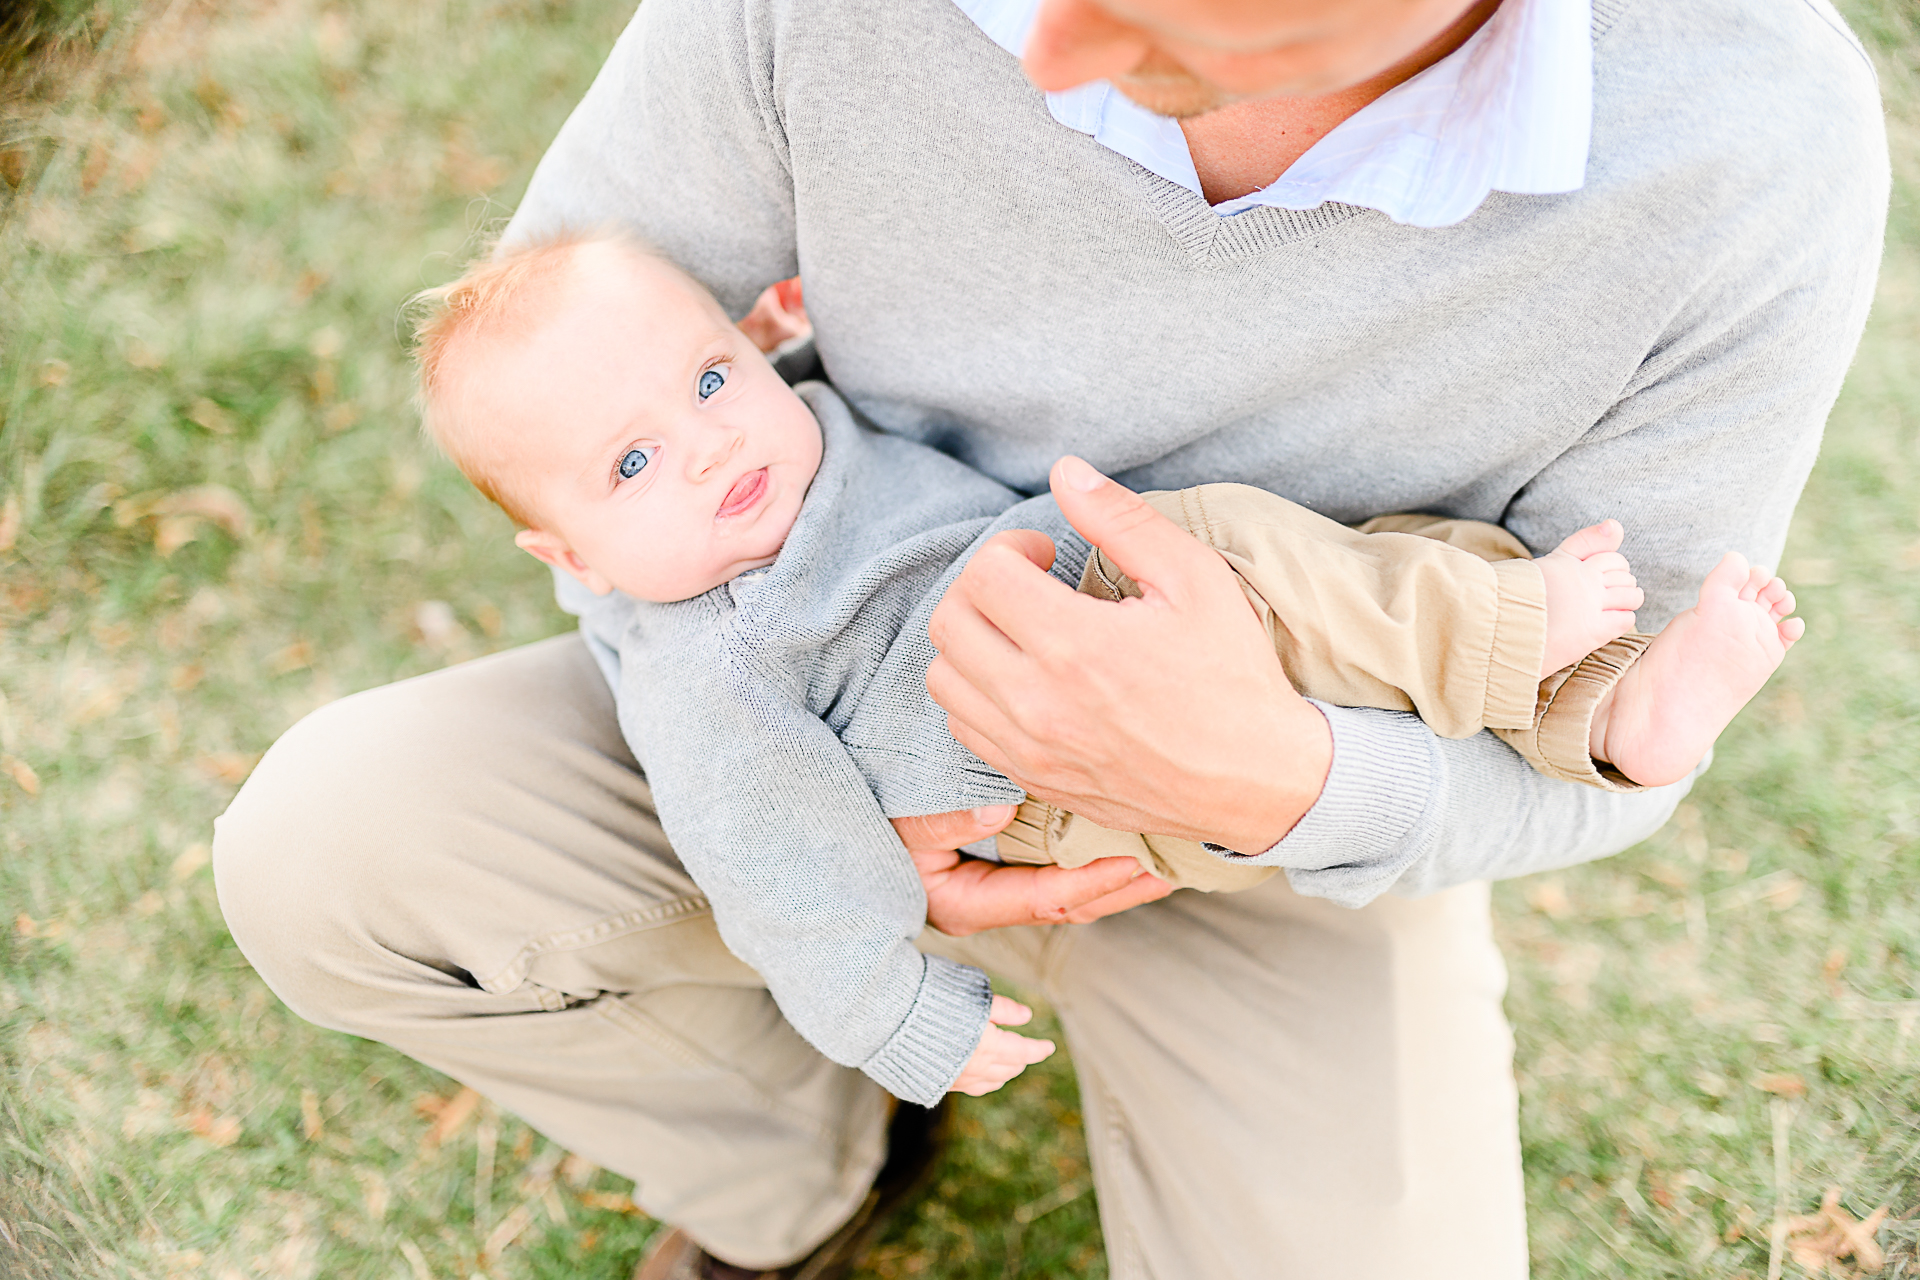 Photo by Norwell Photographer Christina Runnals | Dad holding baby who is making a funny face